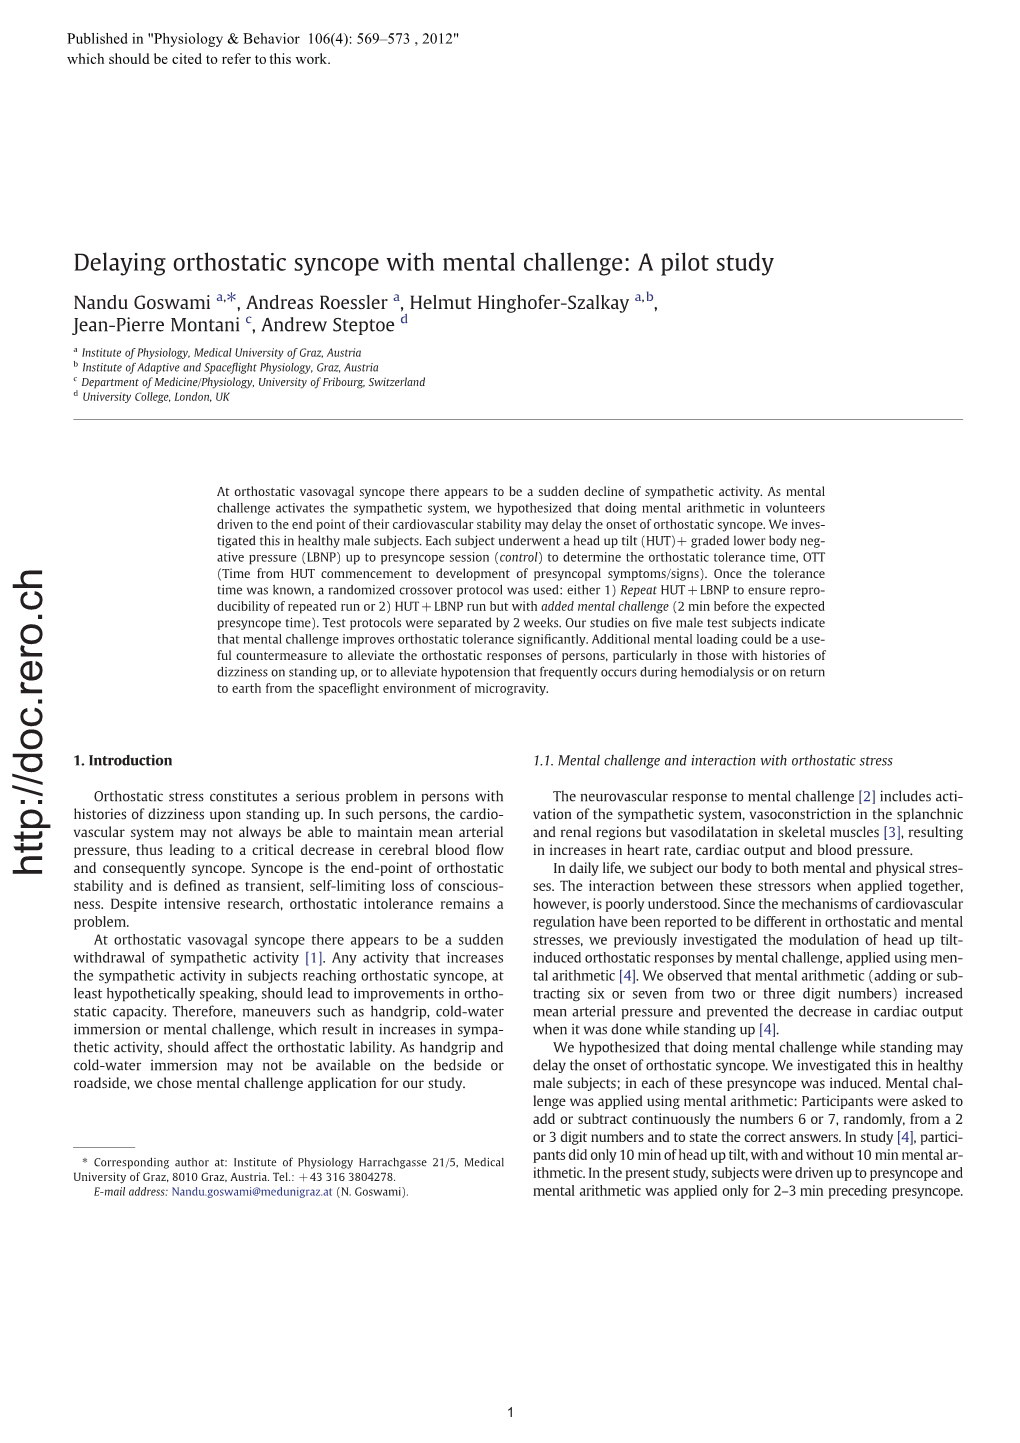 Delaying Orthostatic Syncope with Mental Challenge: a Pilot Study